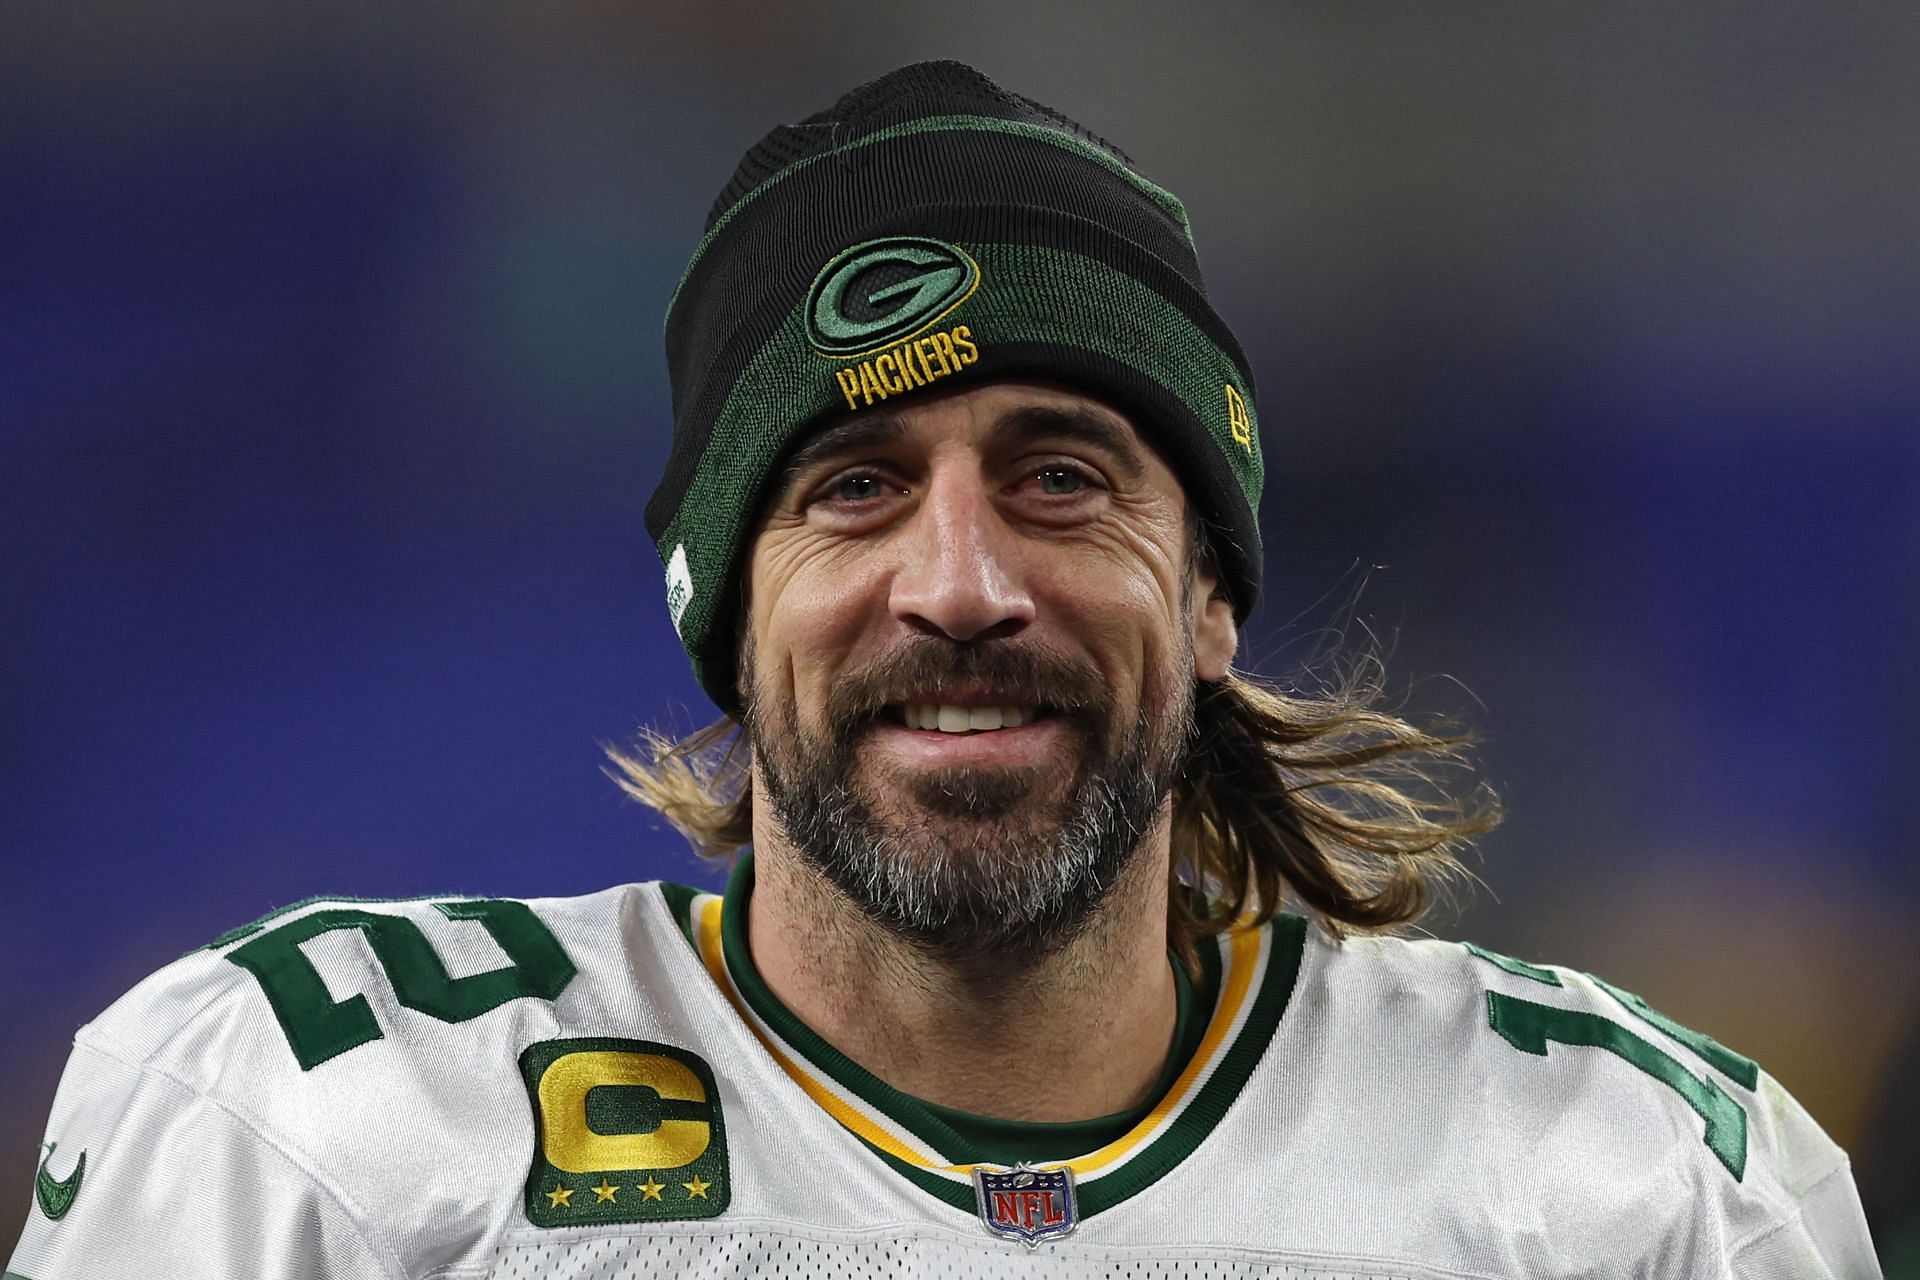 Aaron Rodgers revealed he used a mind-altering substance before the 2020 season